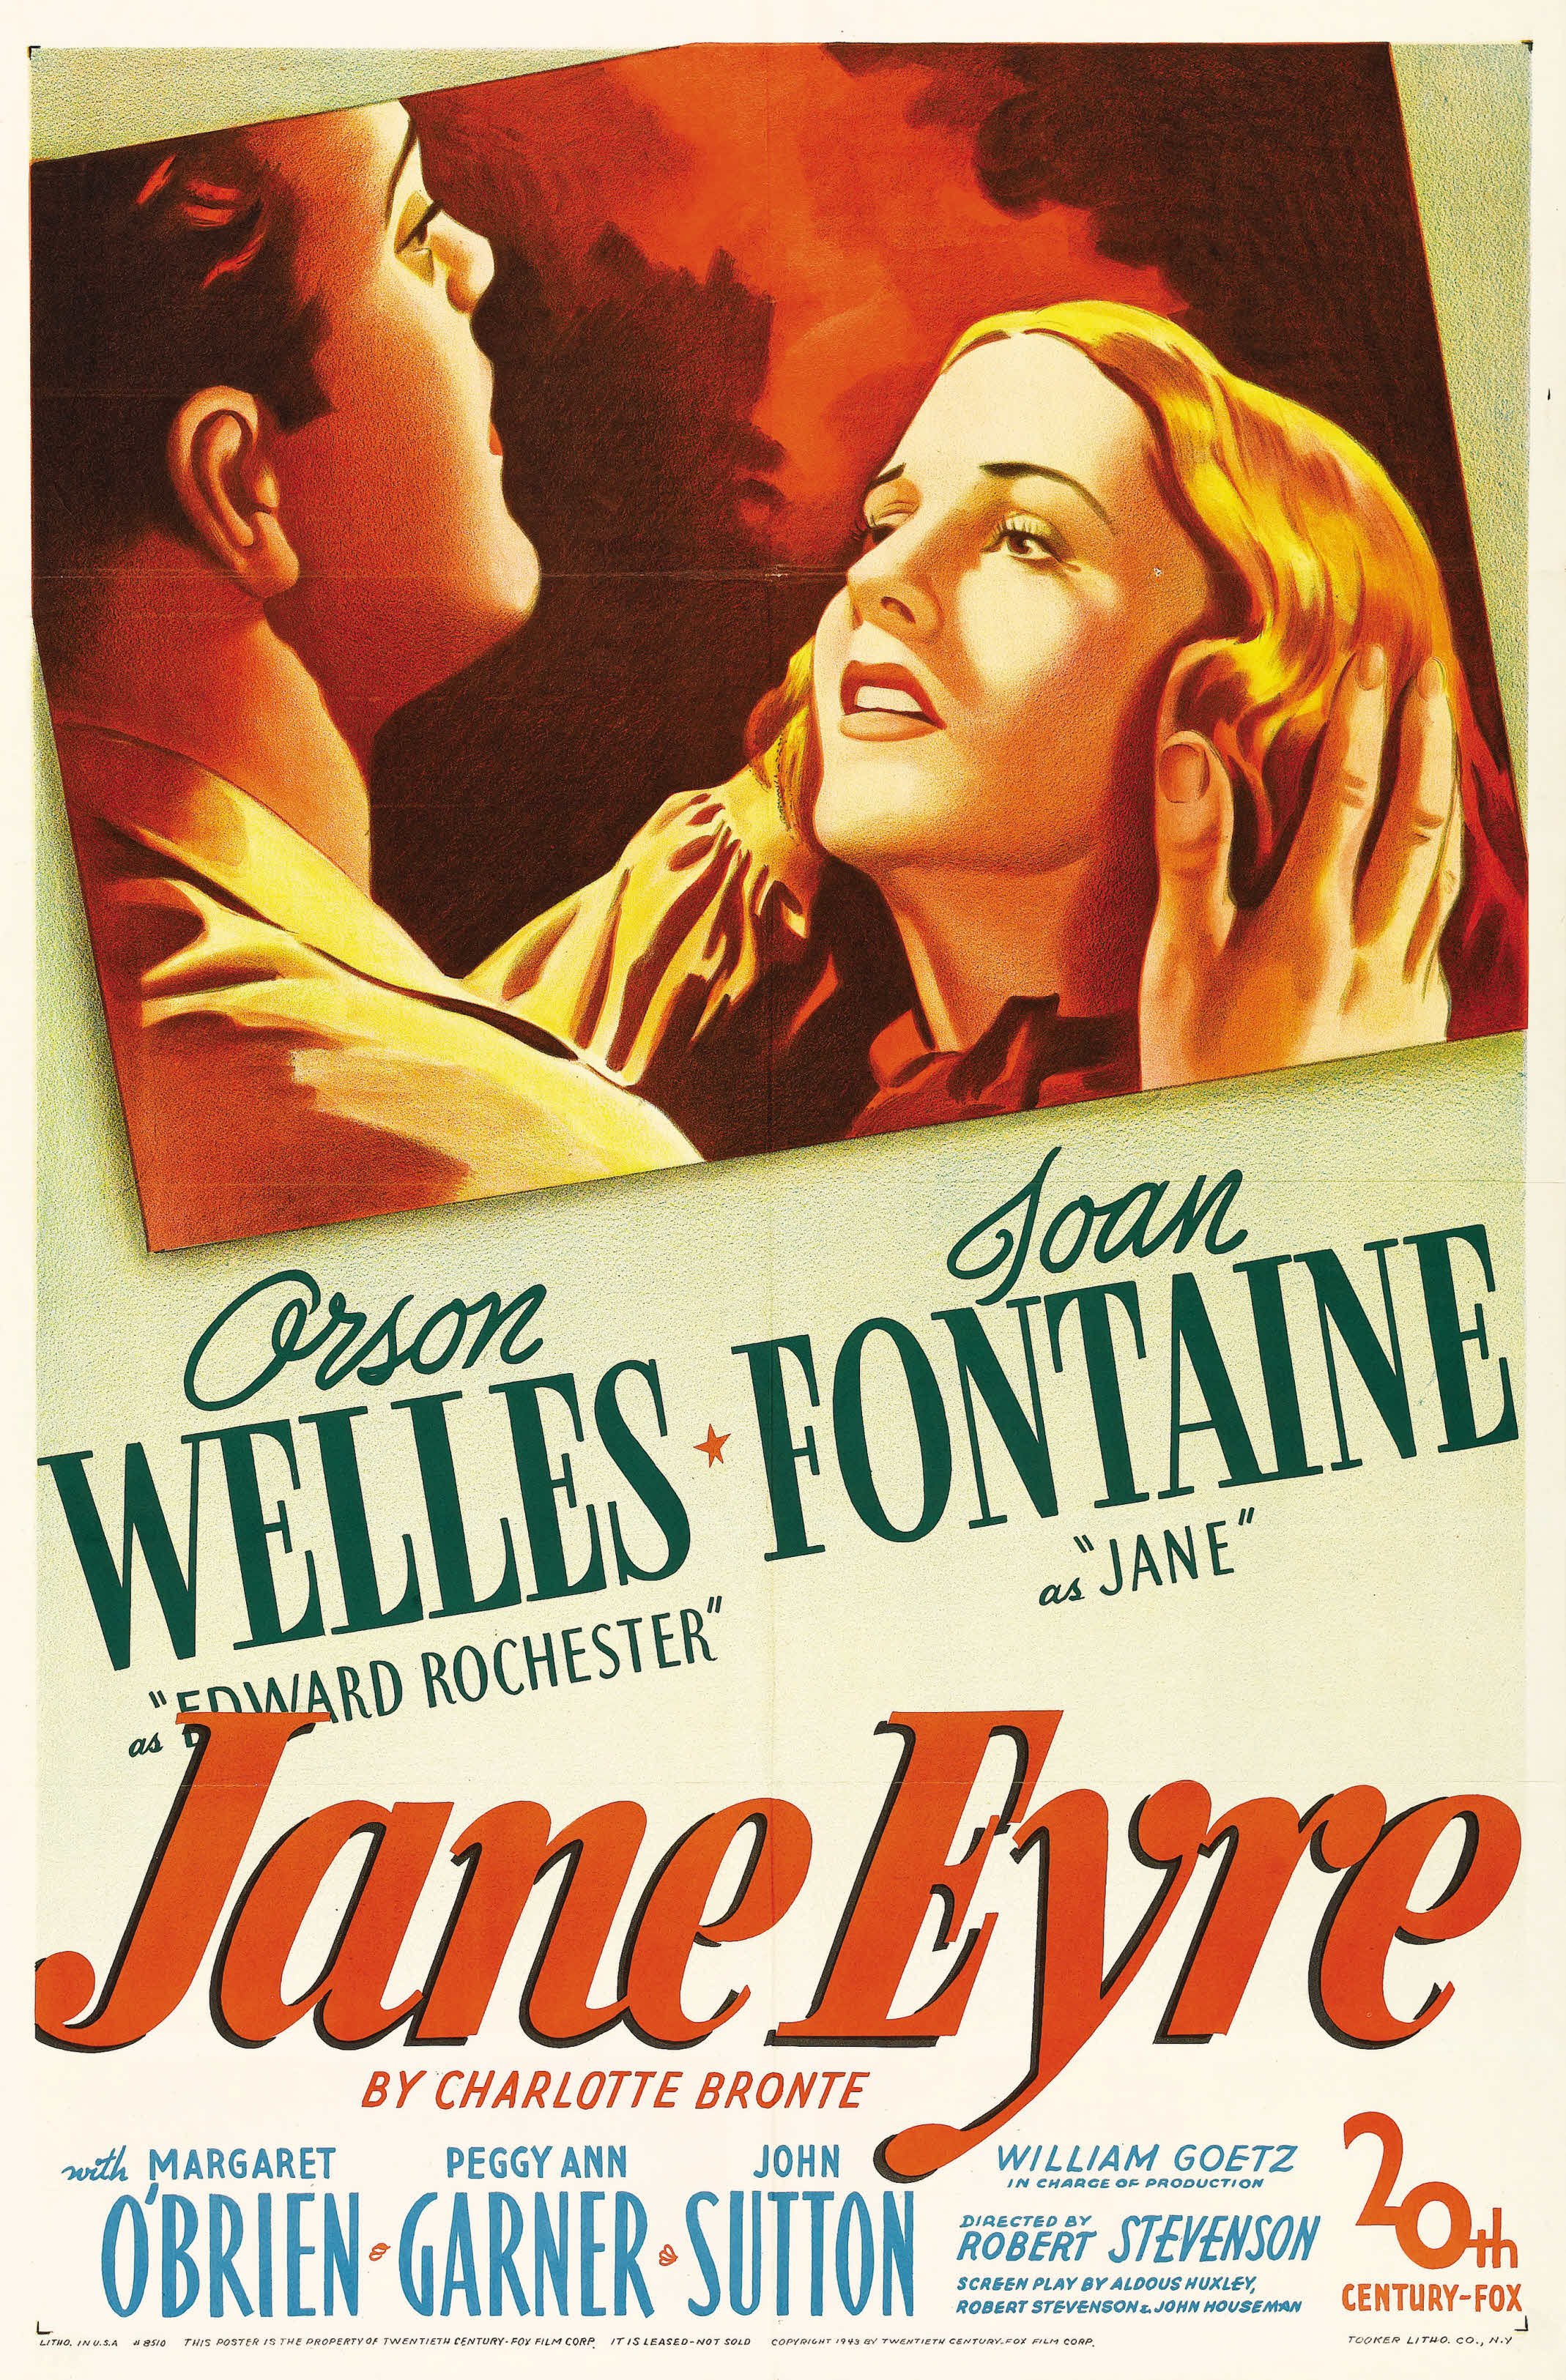 Poster of the movie Jane Eyre